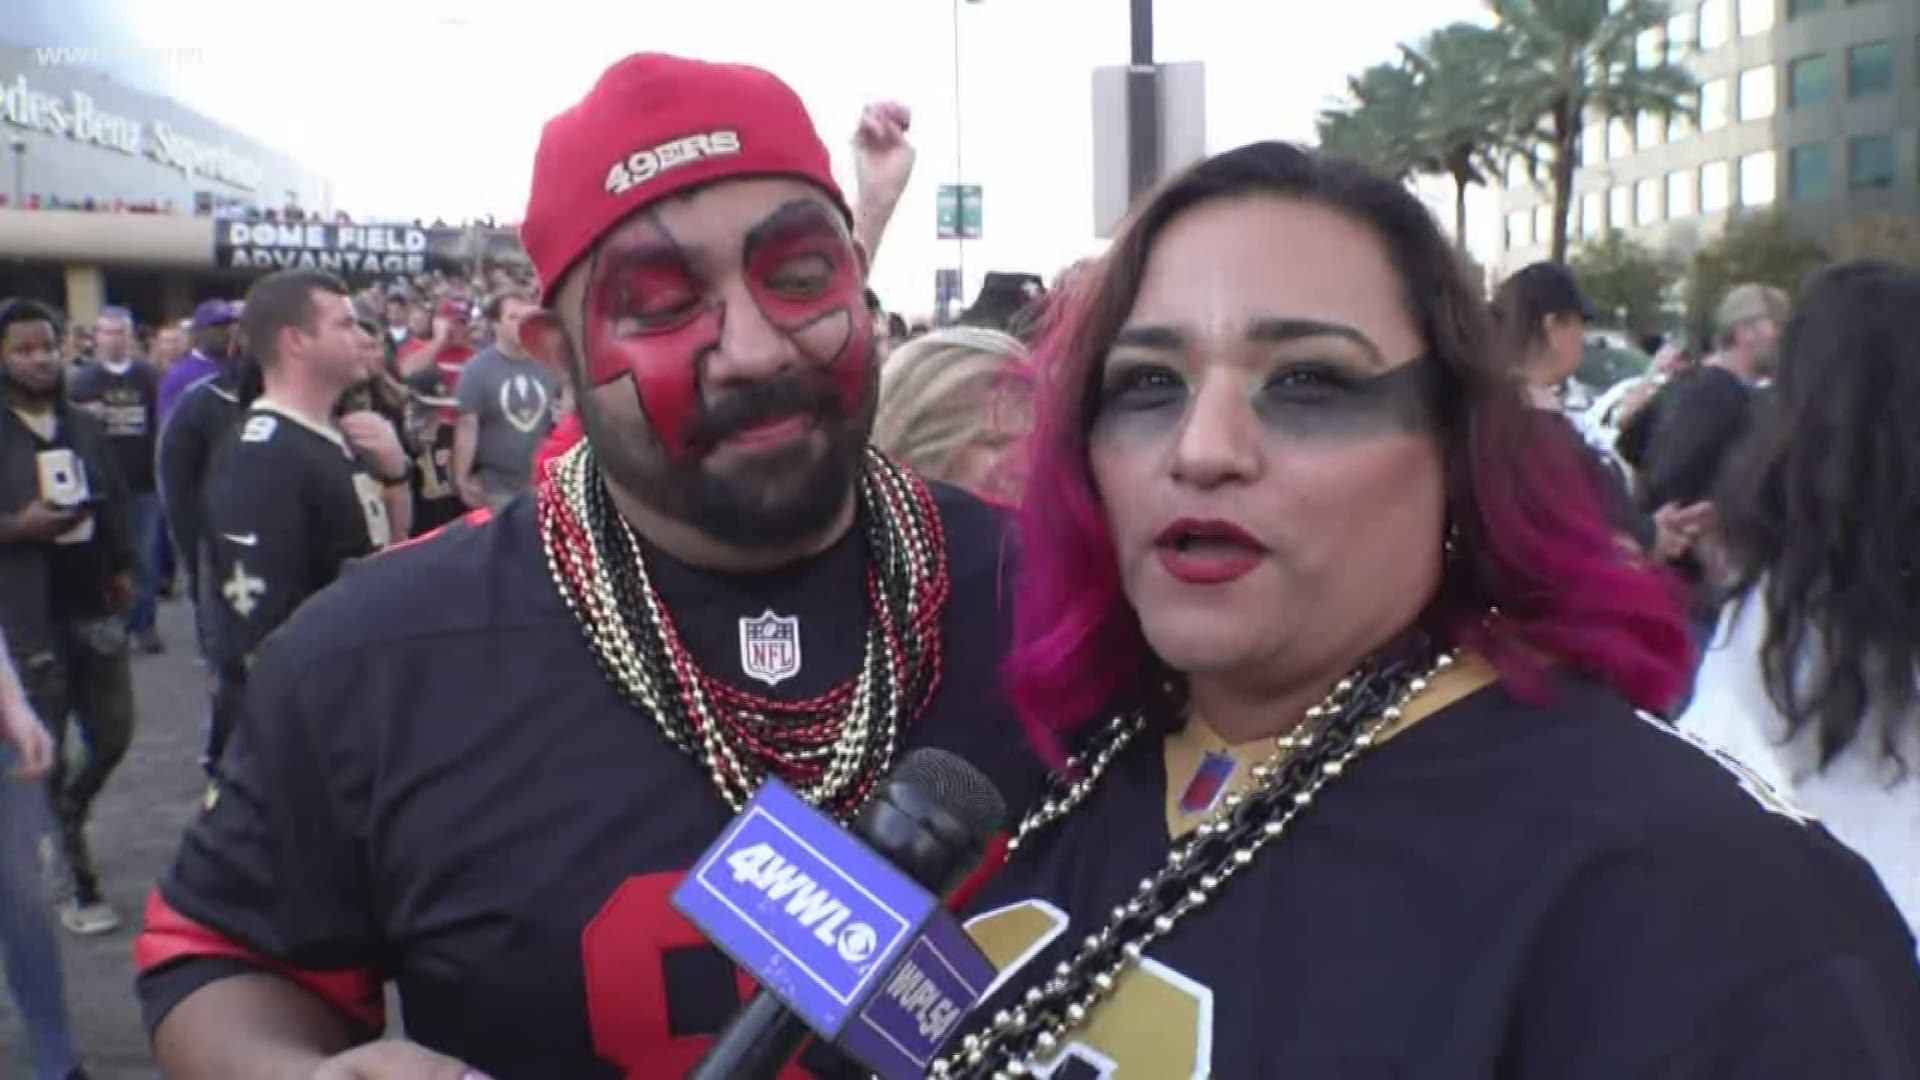 Despite the tough loss in New Orleans, fans are hopeful the Saints will bounce back in the playoffs.